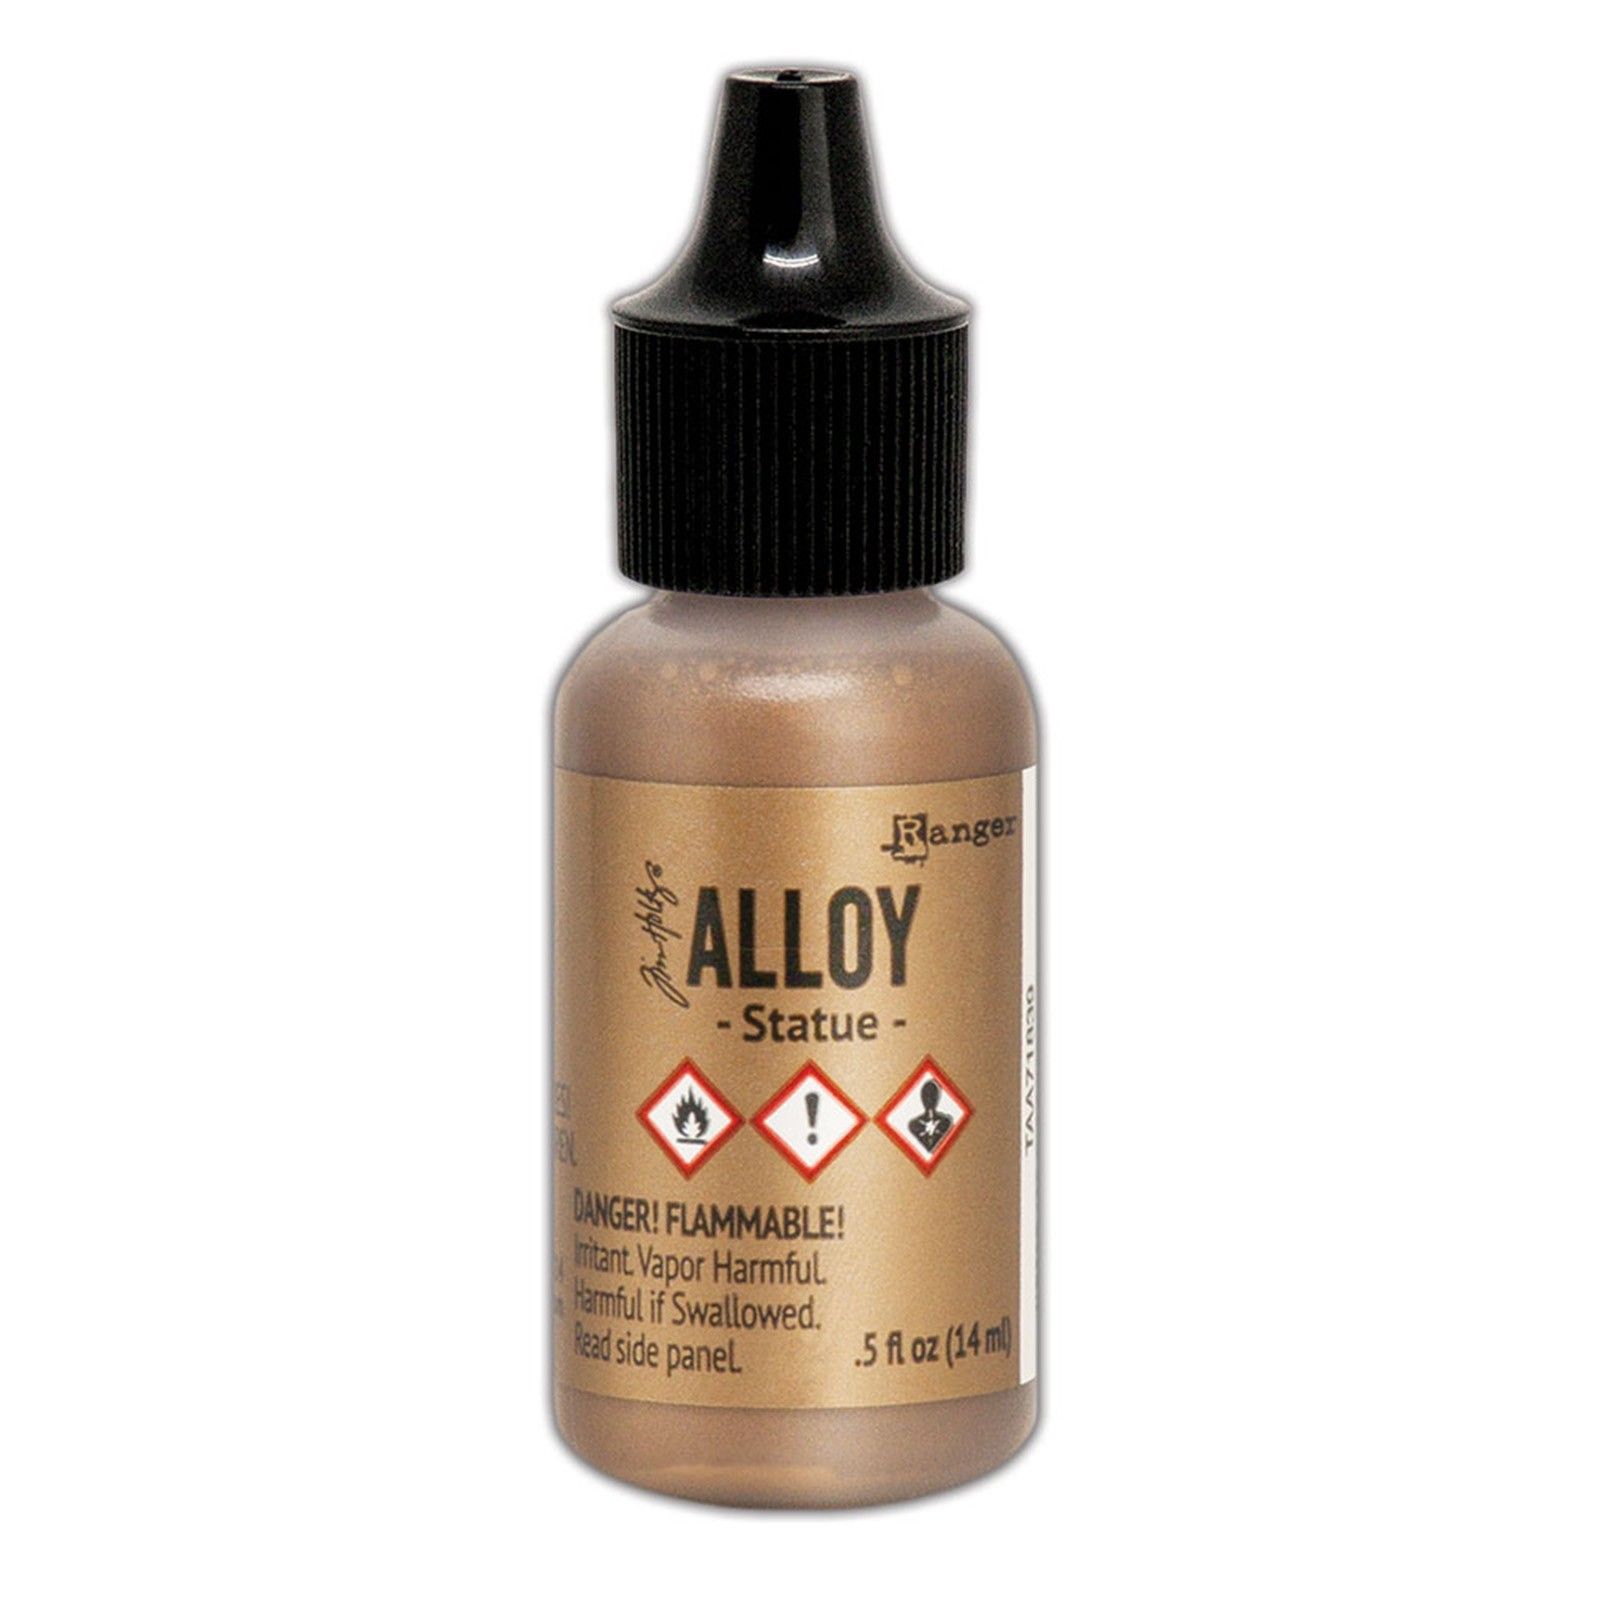 Tim Holtz Alcohol Ink Alloy 15ml - Statue